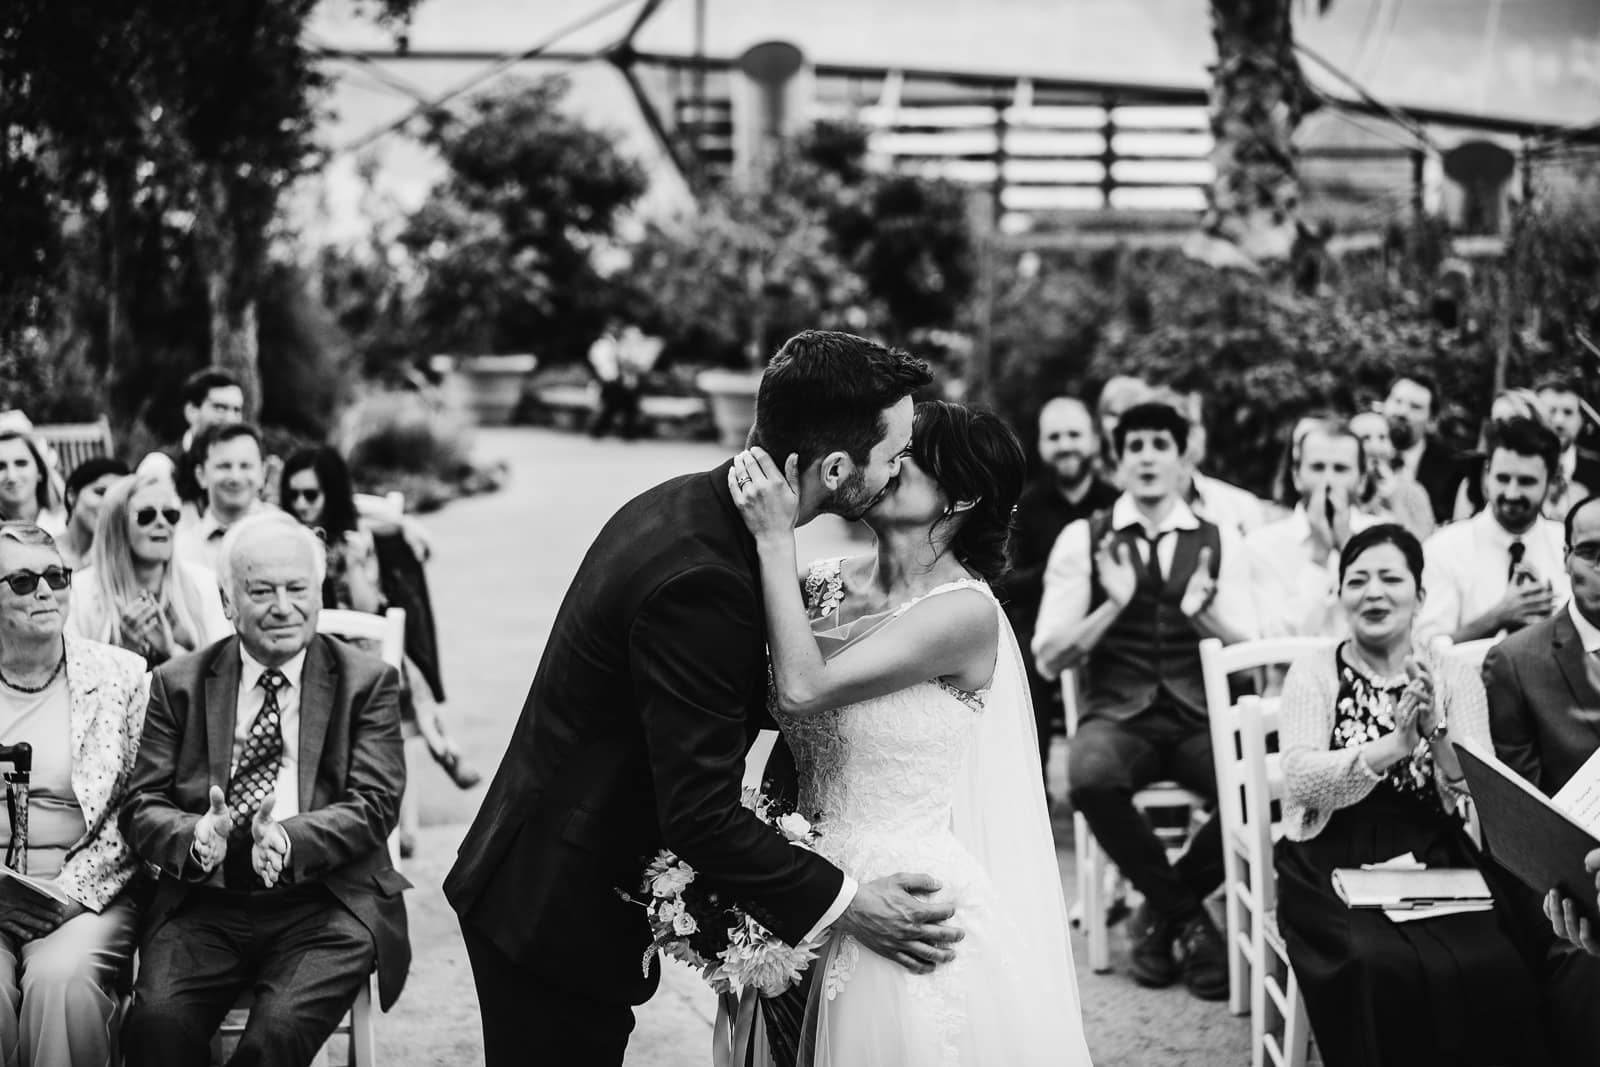 Wedding images from the Eden Project in Cornwal